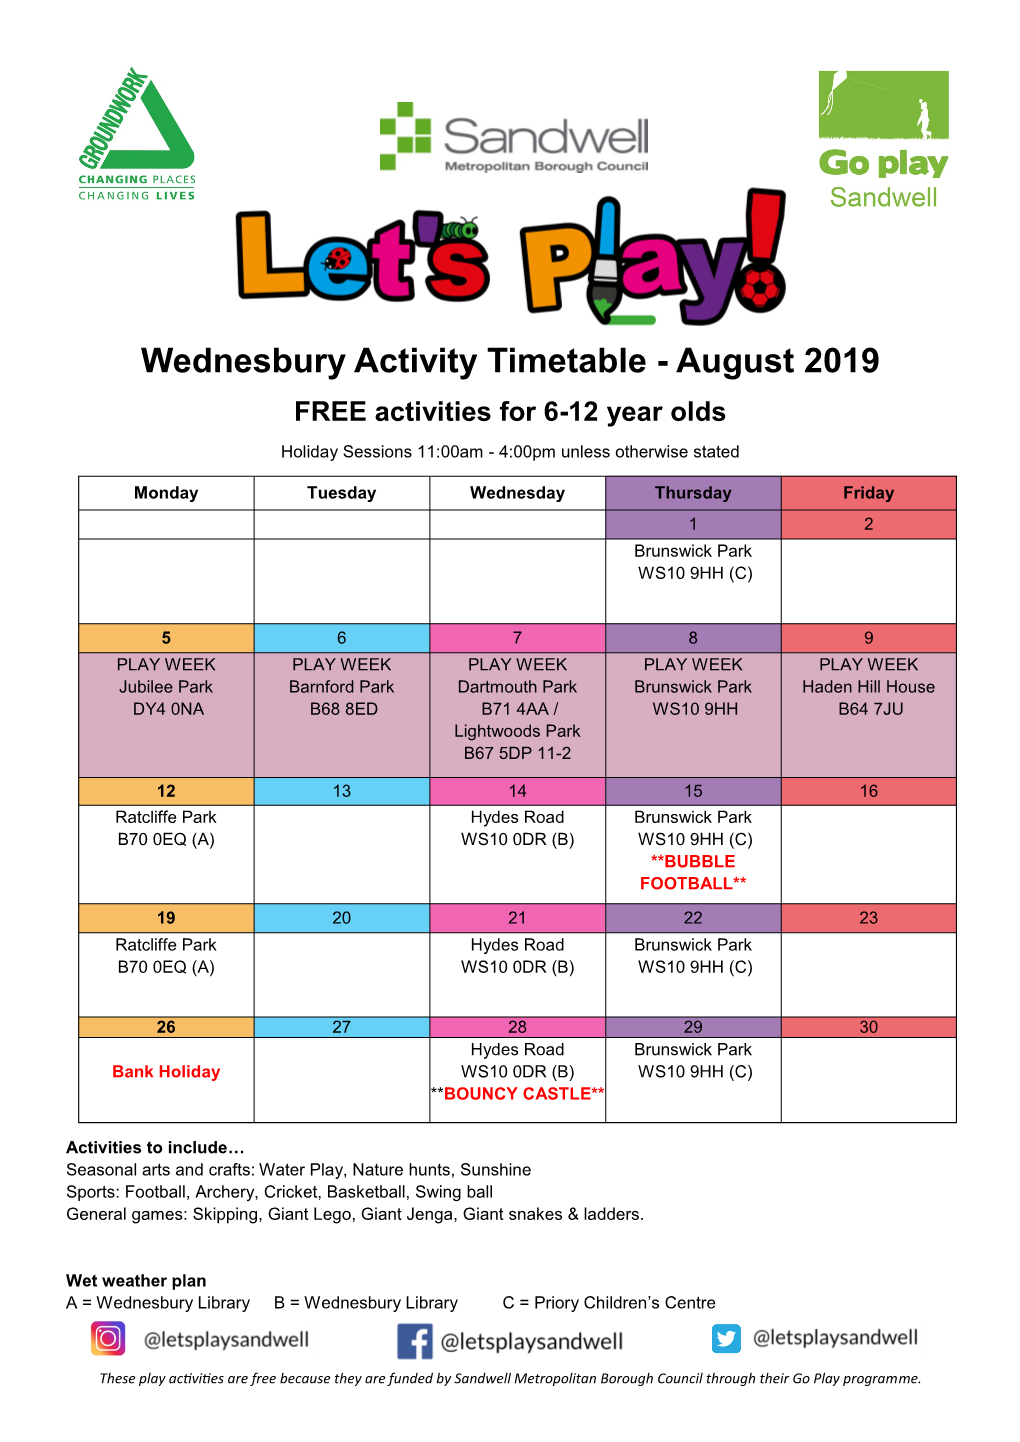 Wednesbury Activity Timetable - August 2019 FREE Activities for 6-12 Year Olds Holiday Sessions 11:00Am - 4:00Pm Unless Otherwise Stated